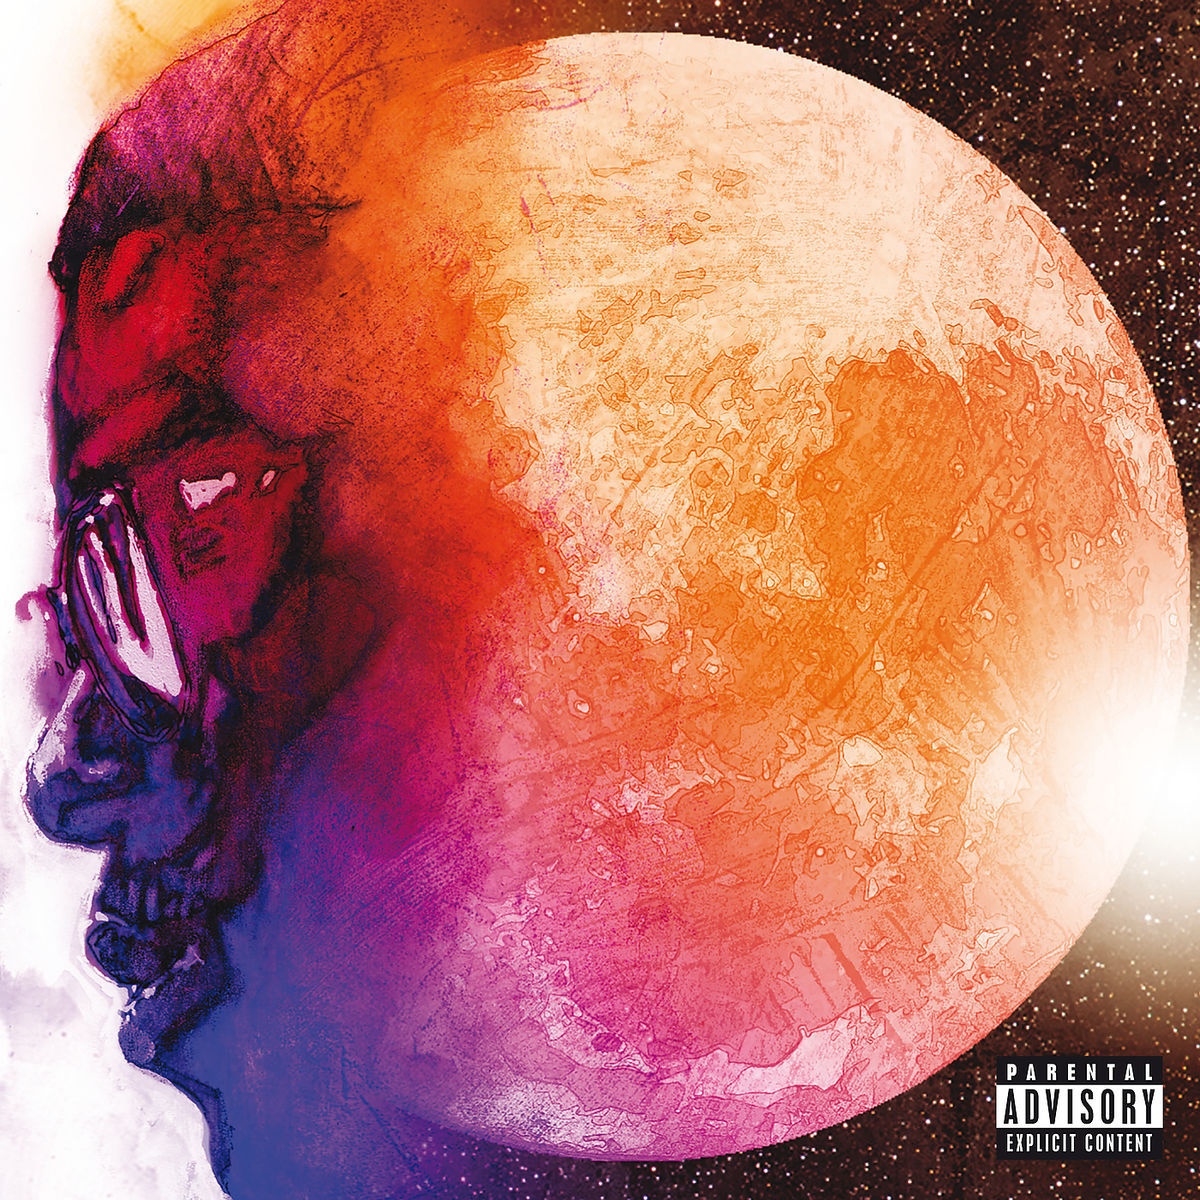 Man On The Moon: End Of Day - Kid Cudi. (CD)